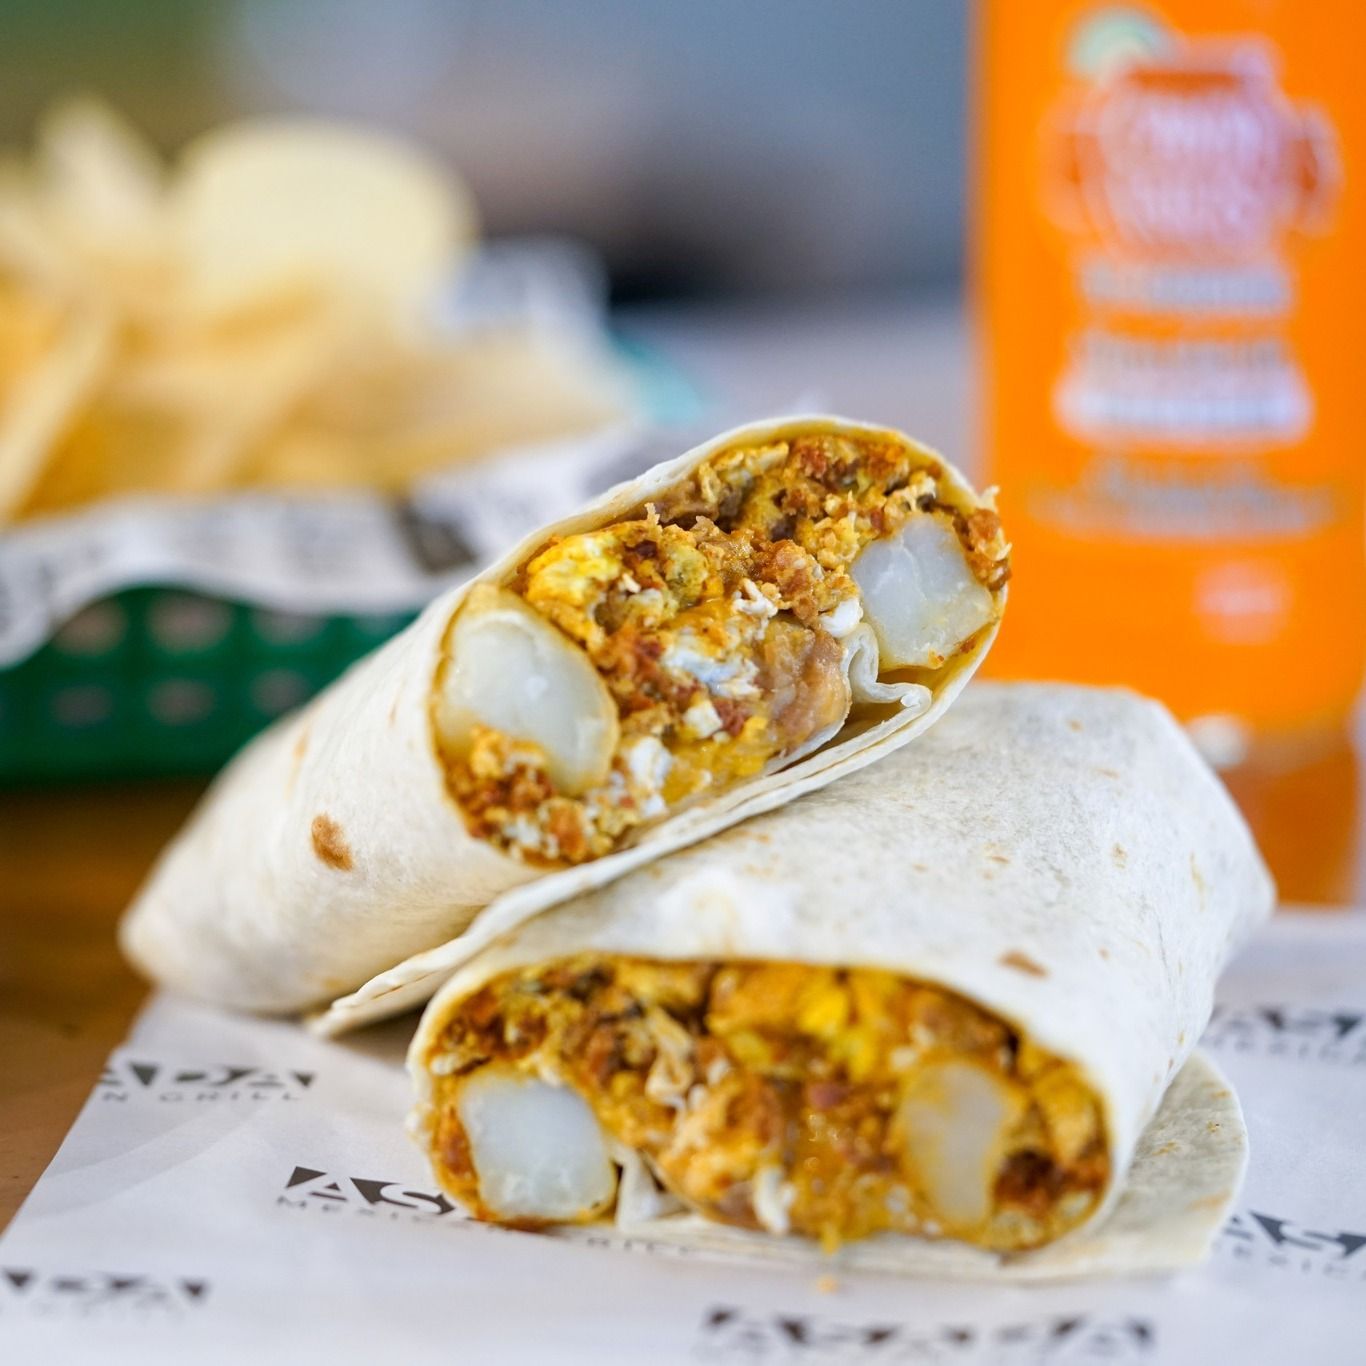 a burrito is sitting on a table next to a bottle of orange juice